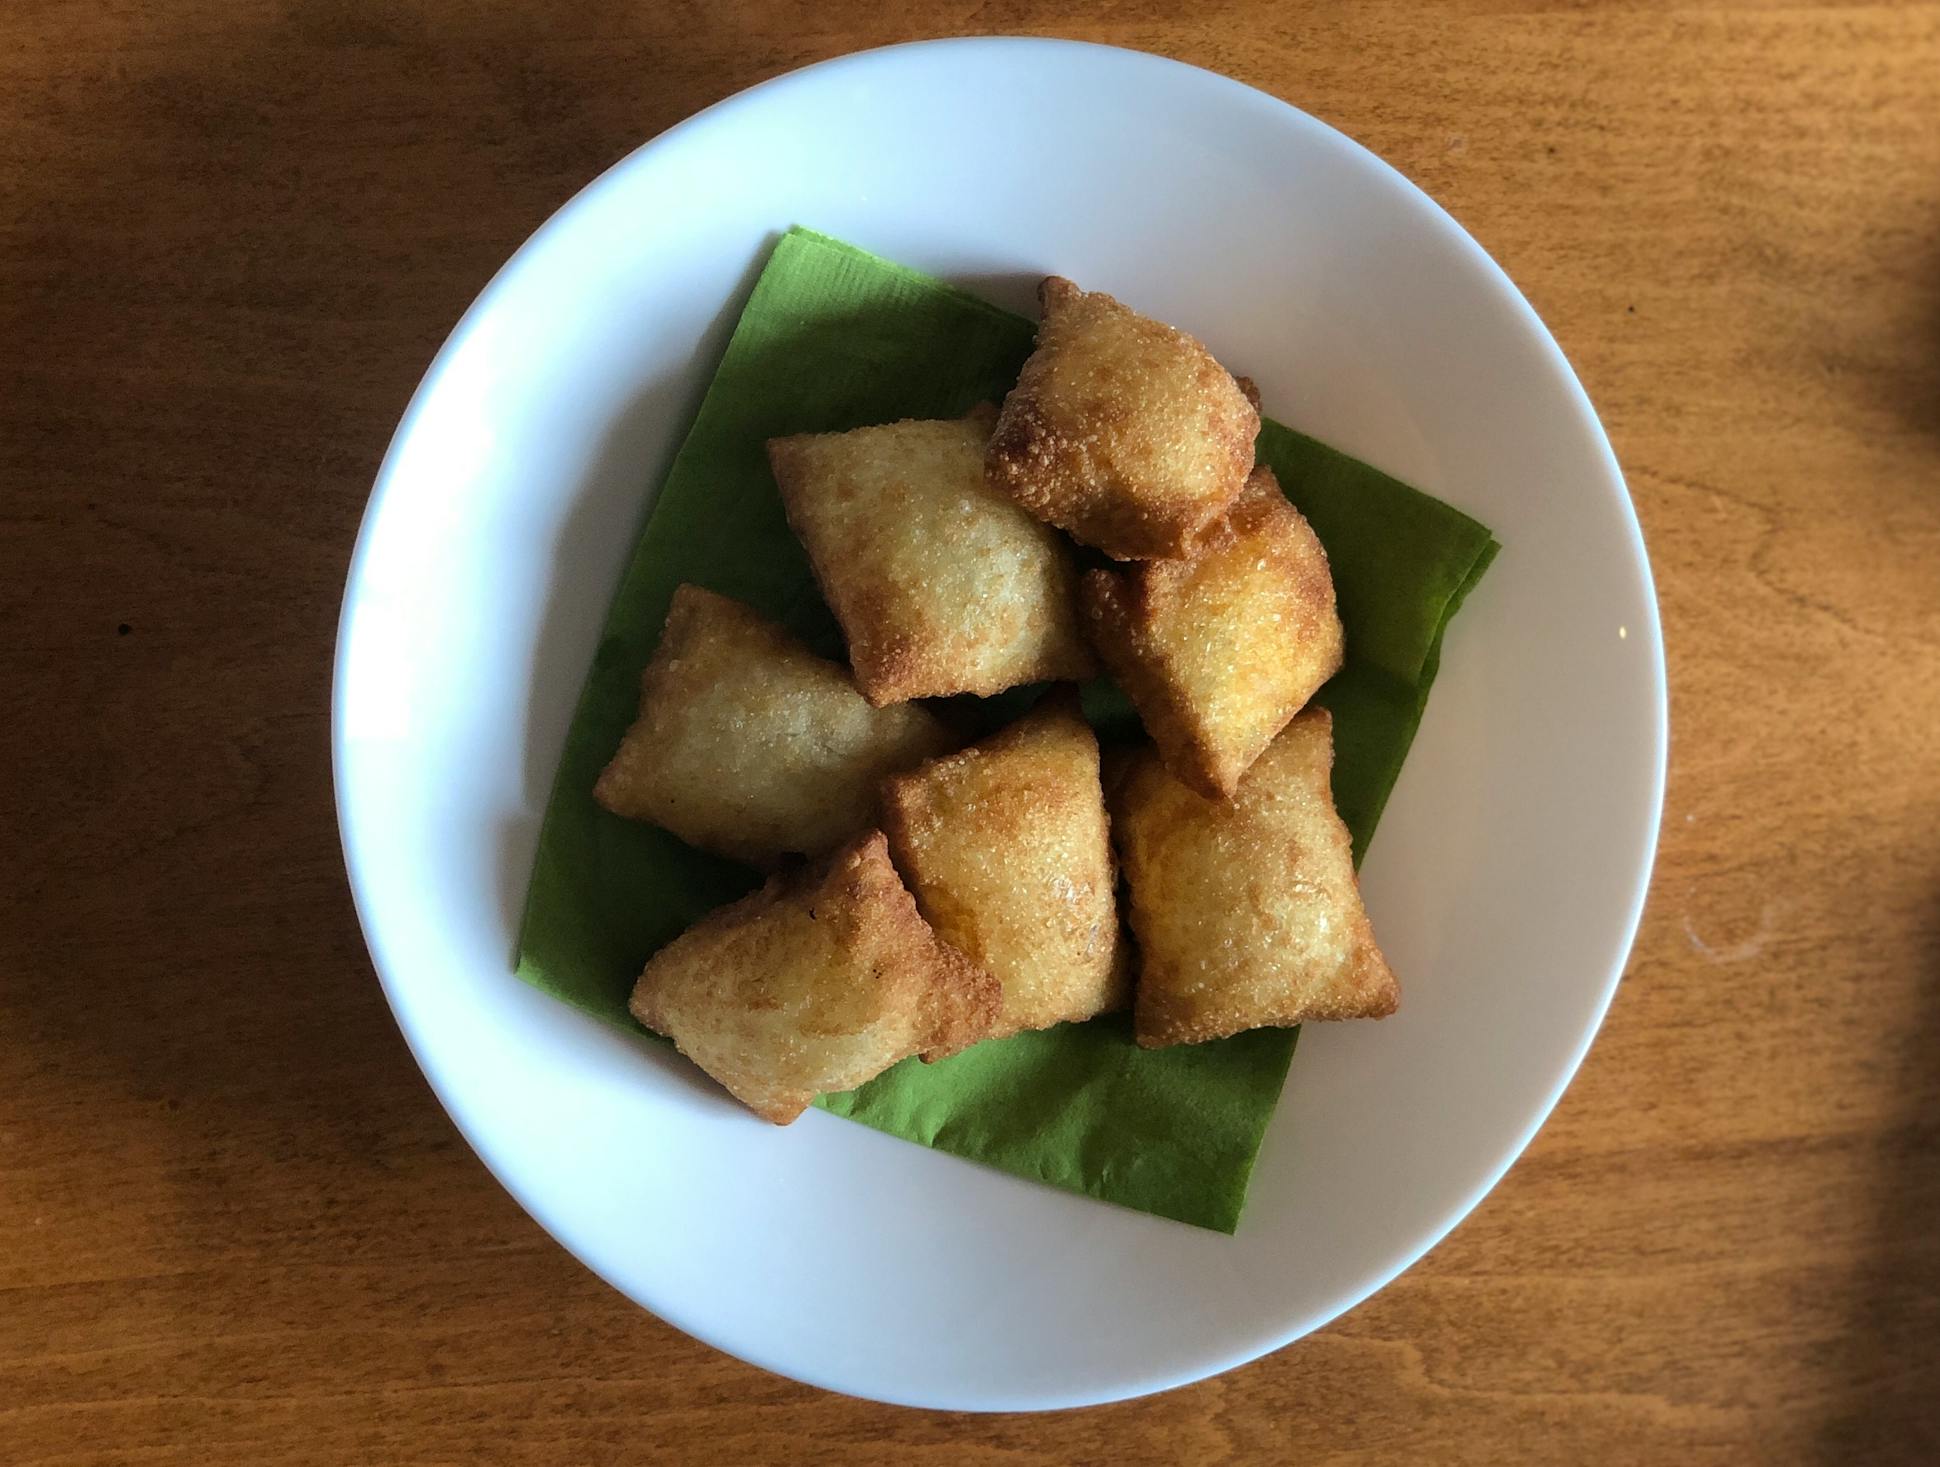 Minnesota Sushi Puffs combine two of the state's iconic foods.